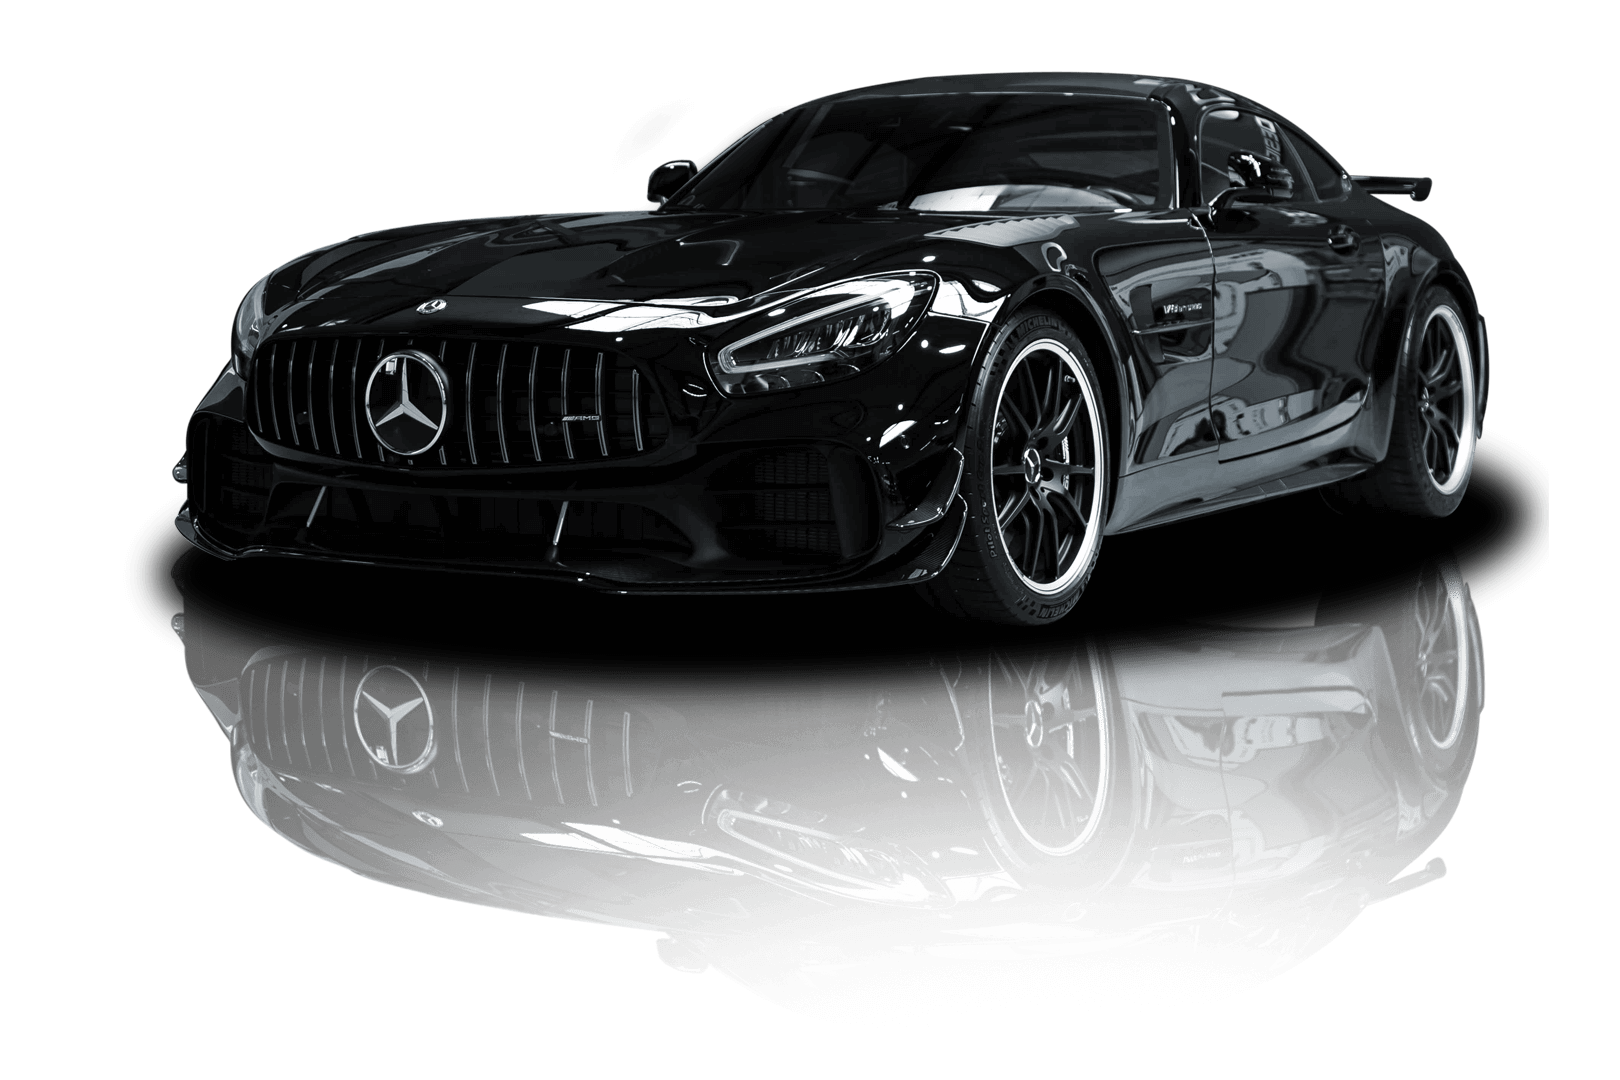 https://wrapping.md-exclusive-cardesign.com/wp-content/uploads/2021/10/Mercedes-AMG-GT-R-Pro-Steinschlagschutzfolierung-XPEL-Ultimate-Plus-PPF-Lackschutz-Folie-MD-exclusive-cardesign-Autofolierung-NRW.png